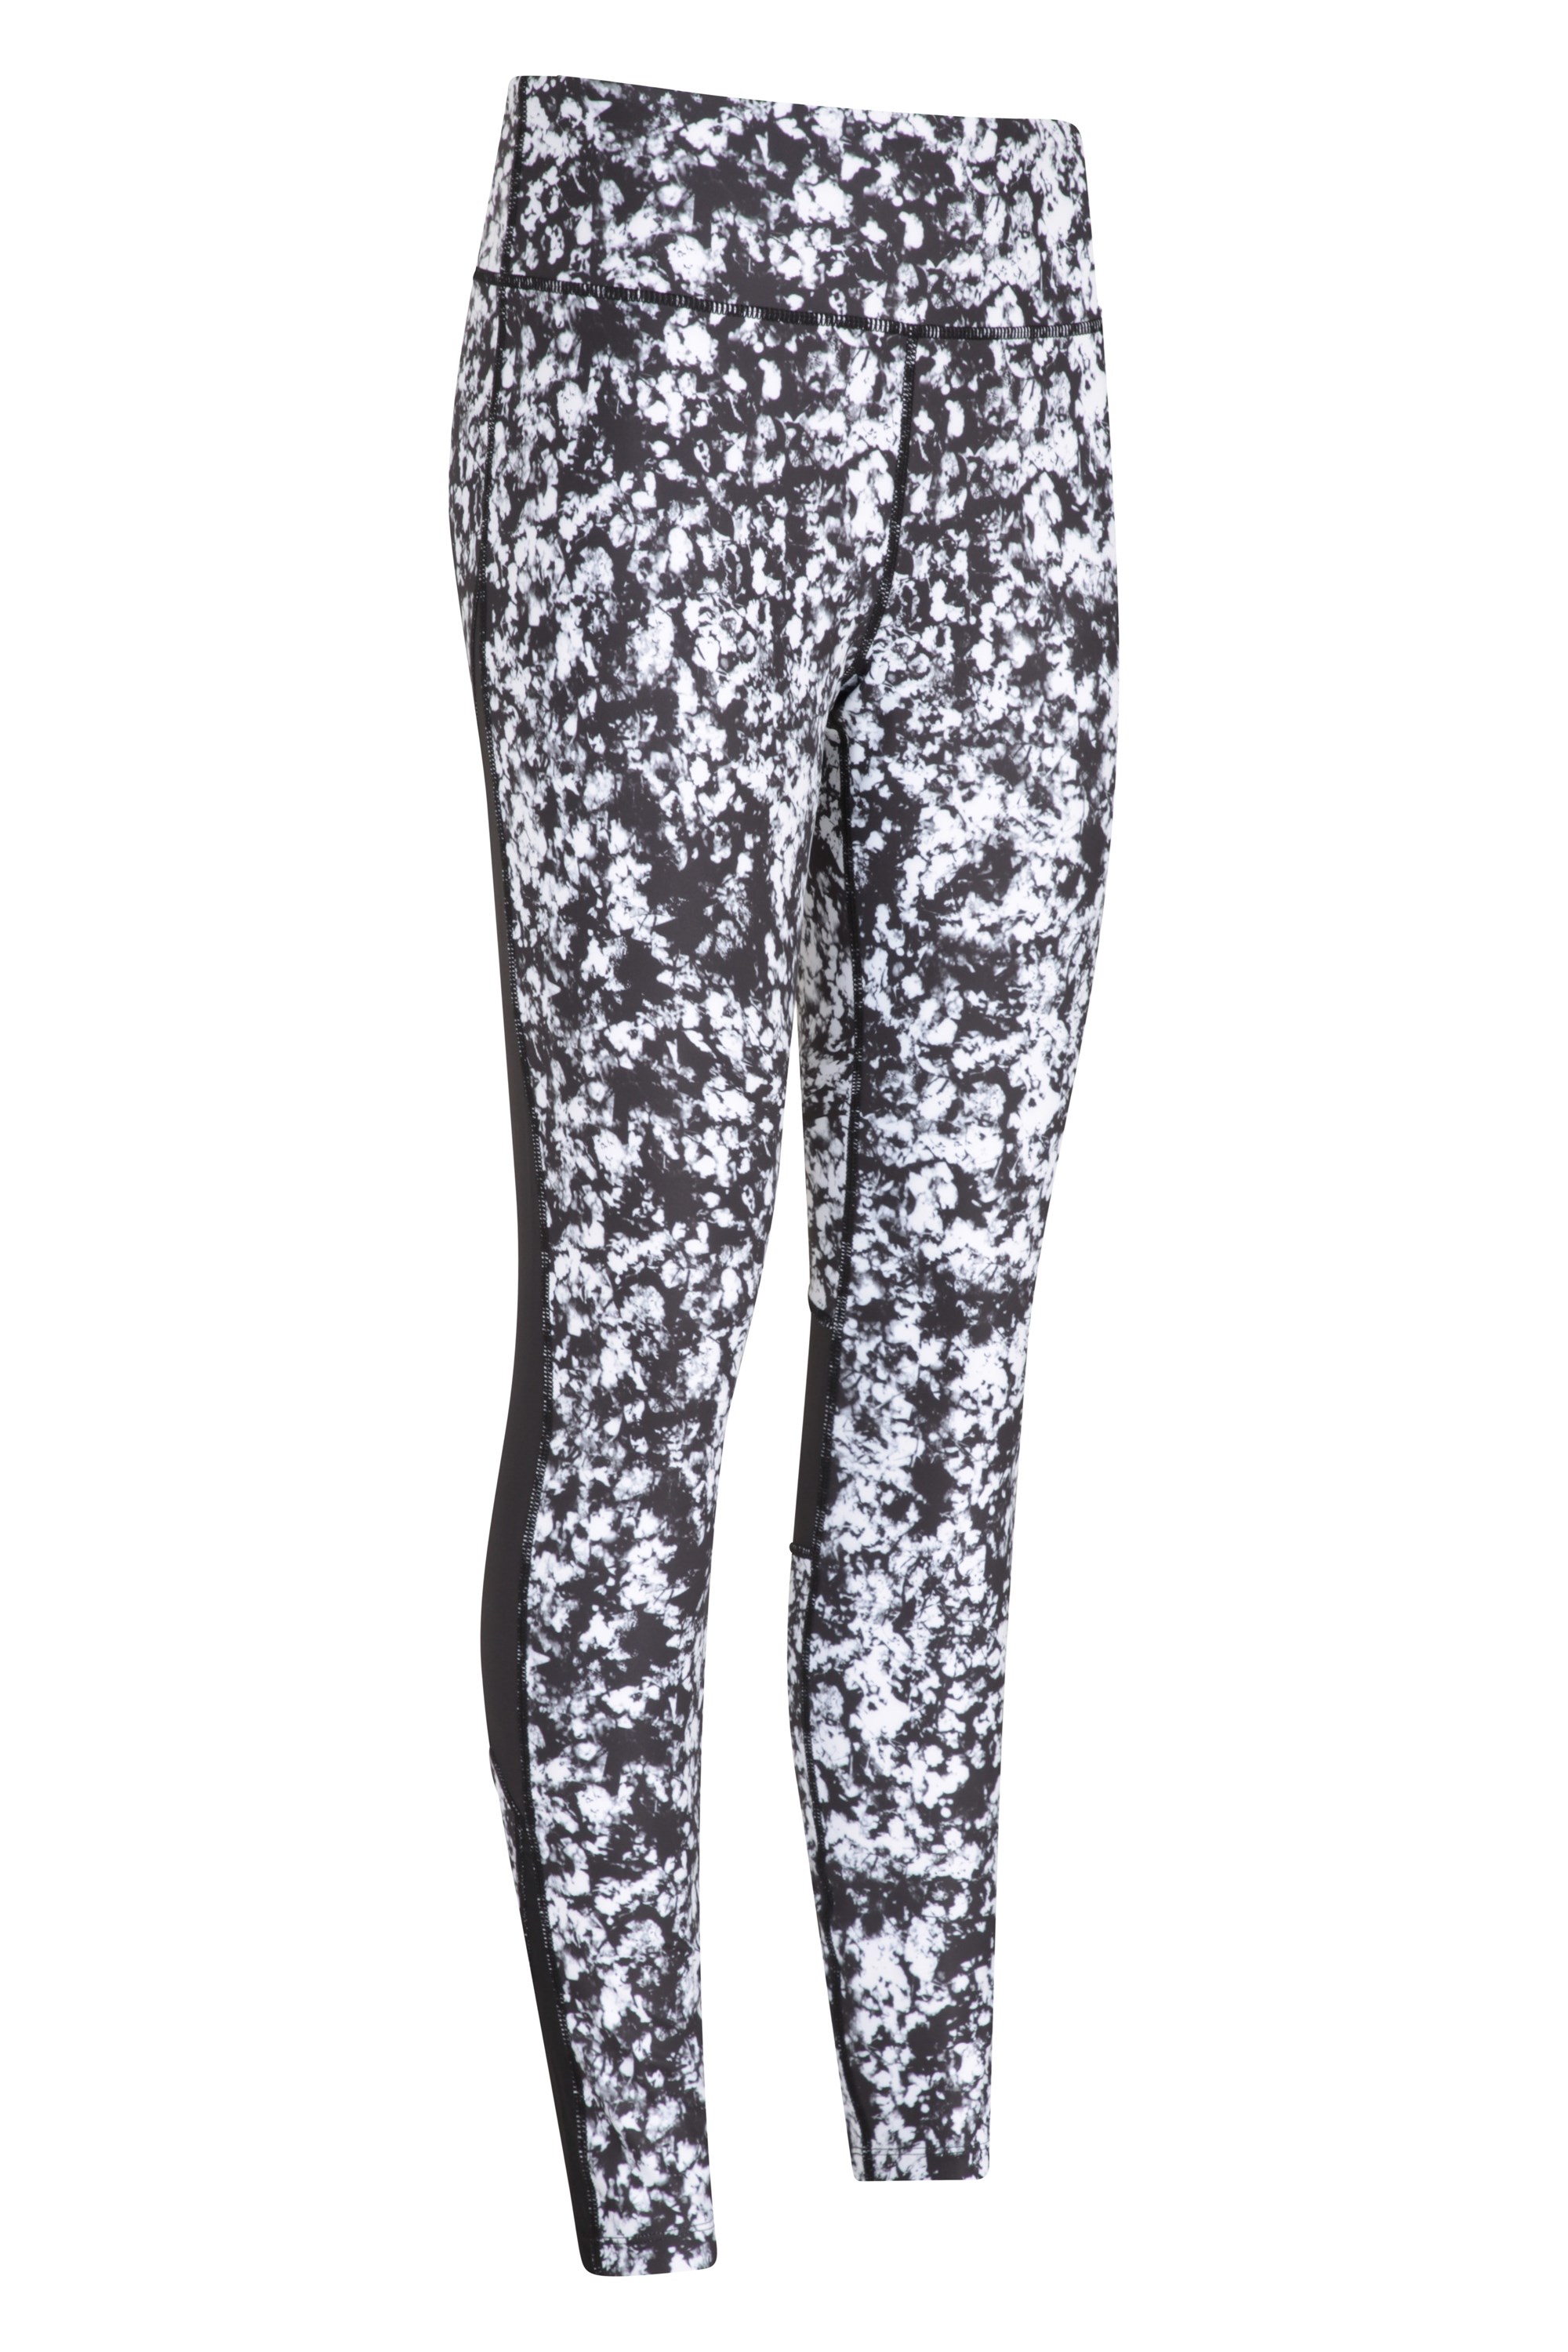 Kmart Printed Leggings-Ditsy 2 Size: 1, Price History & Comparison